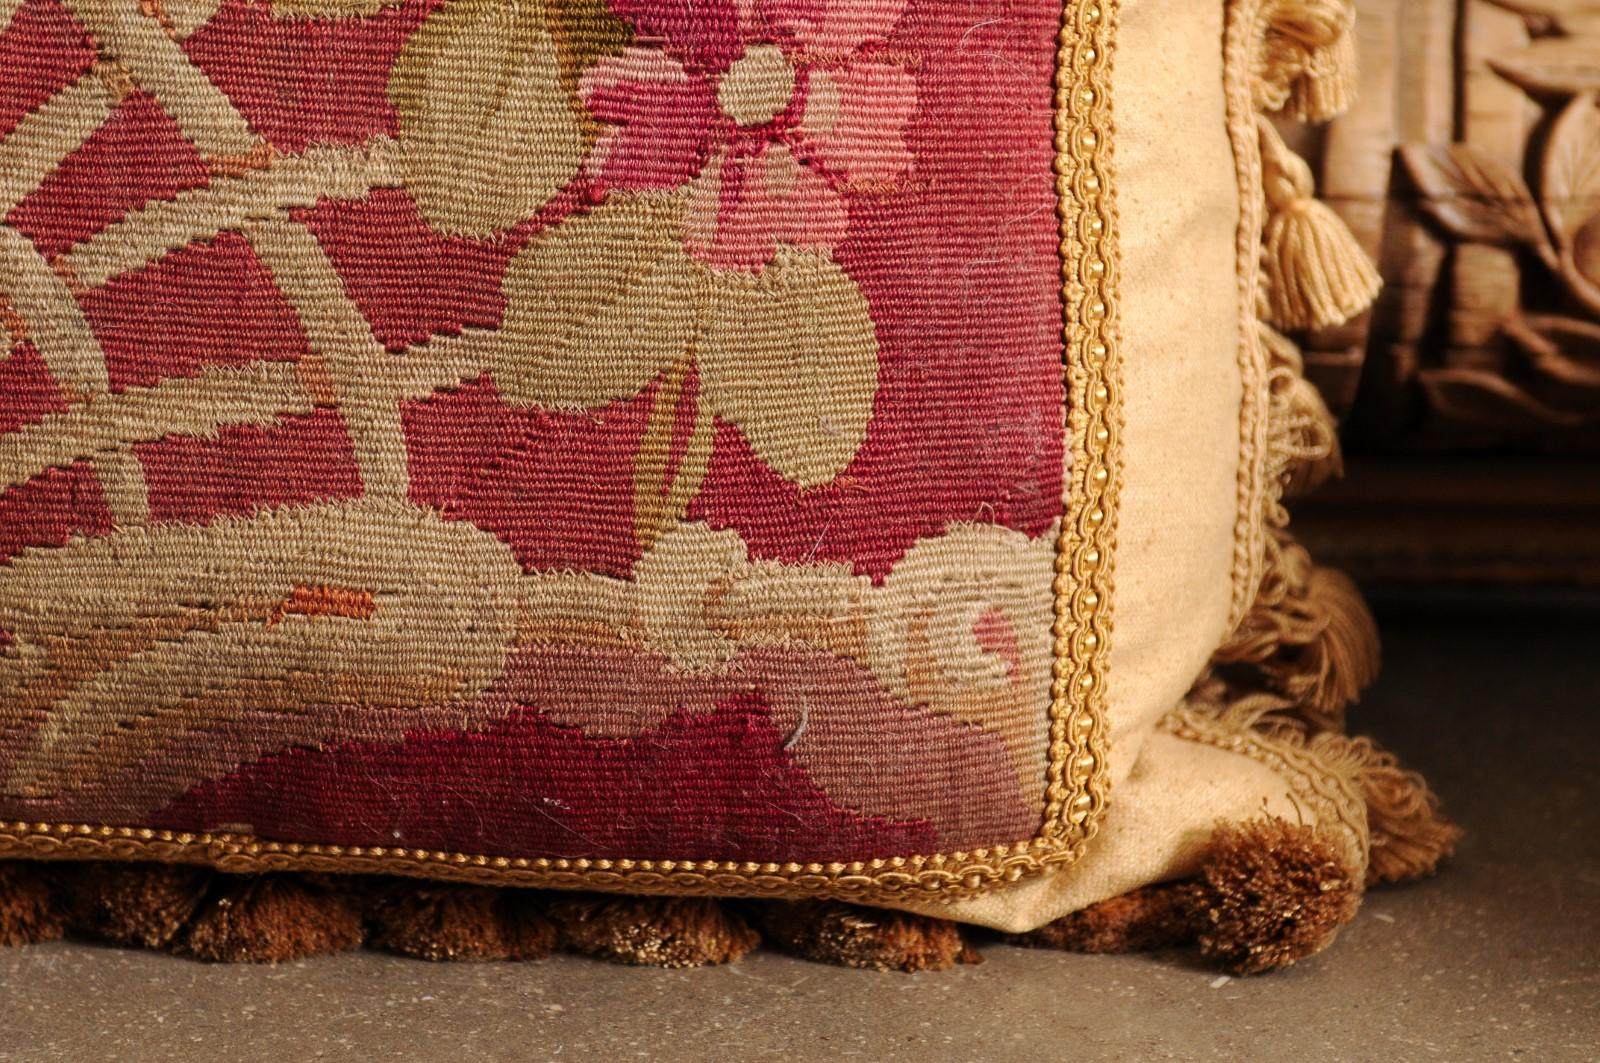 French 19th Century Aubusson Tapestry Pillow with Floral Decor and Tassels For Sale 13